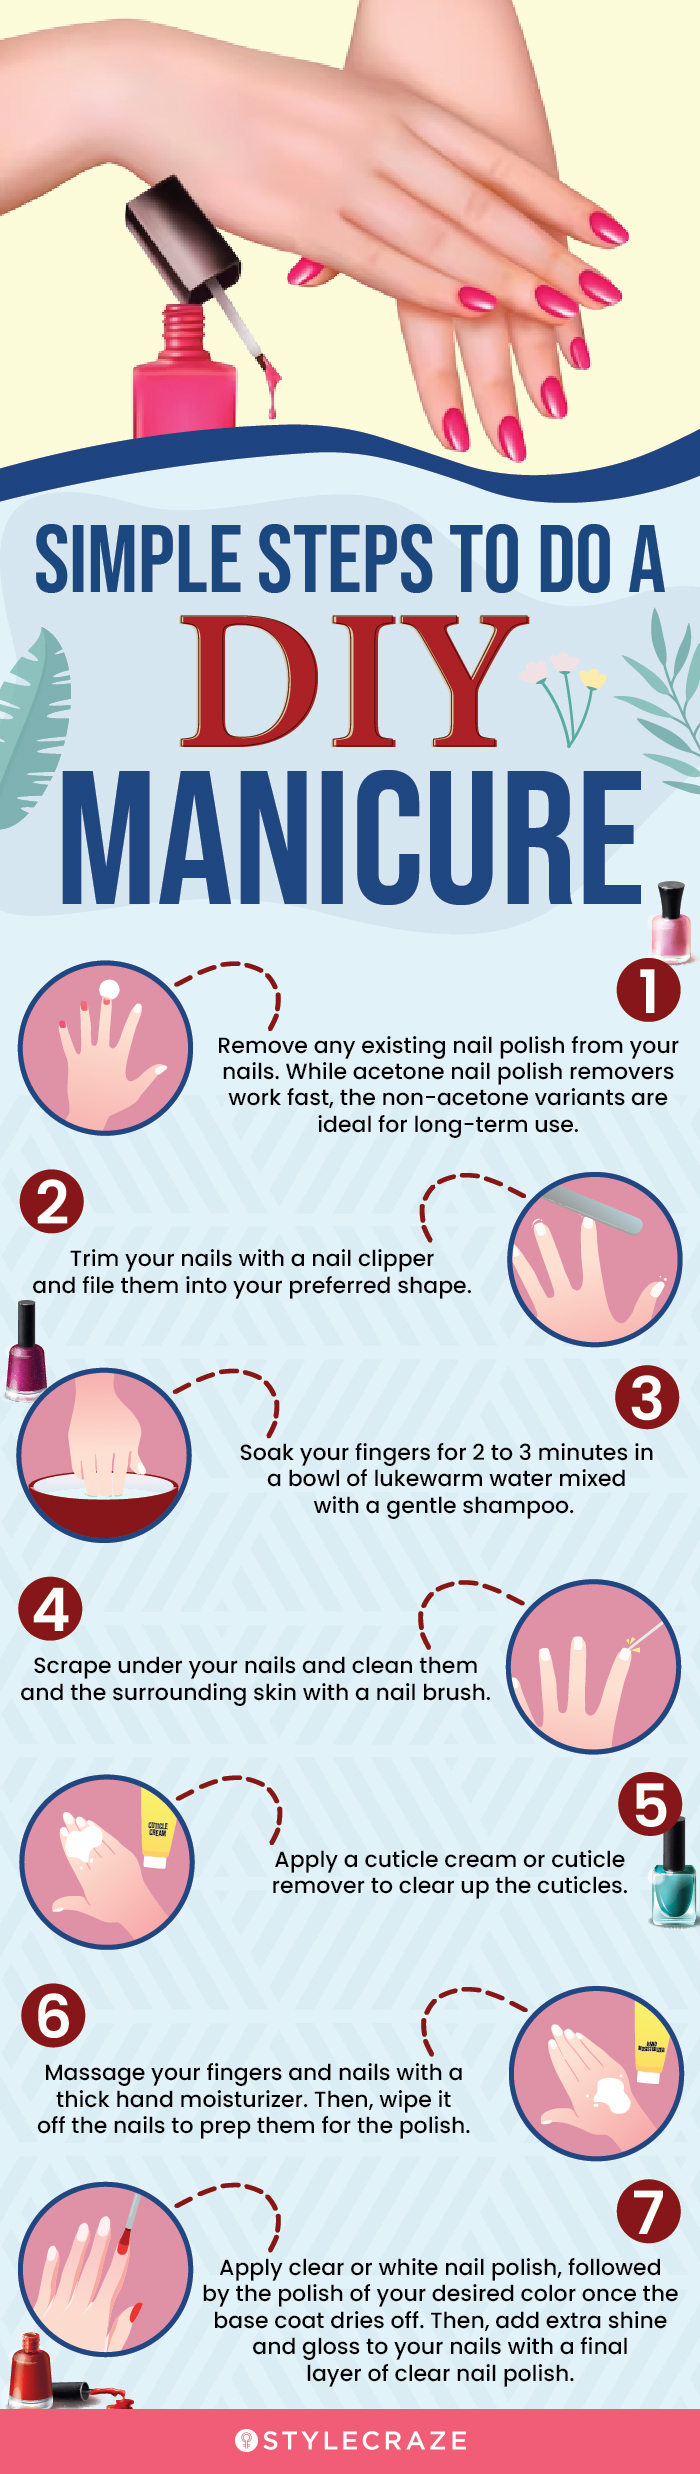 simple steps to do a diy manicure (infographic)